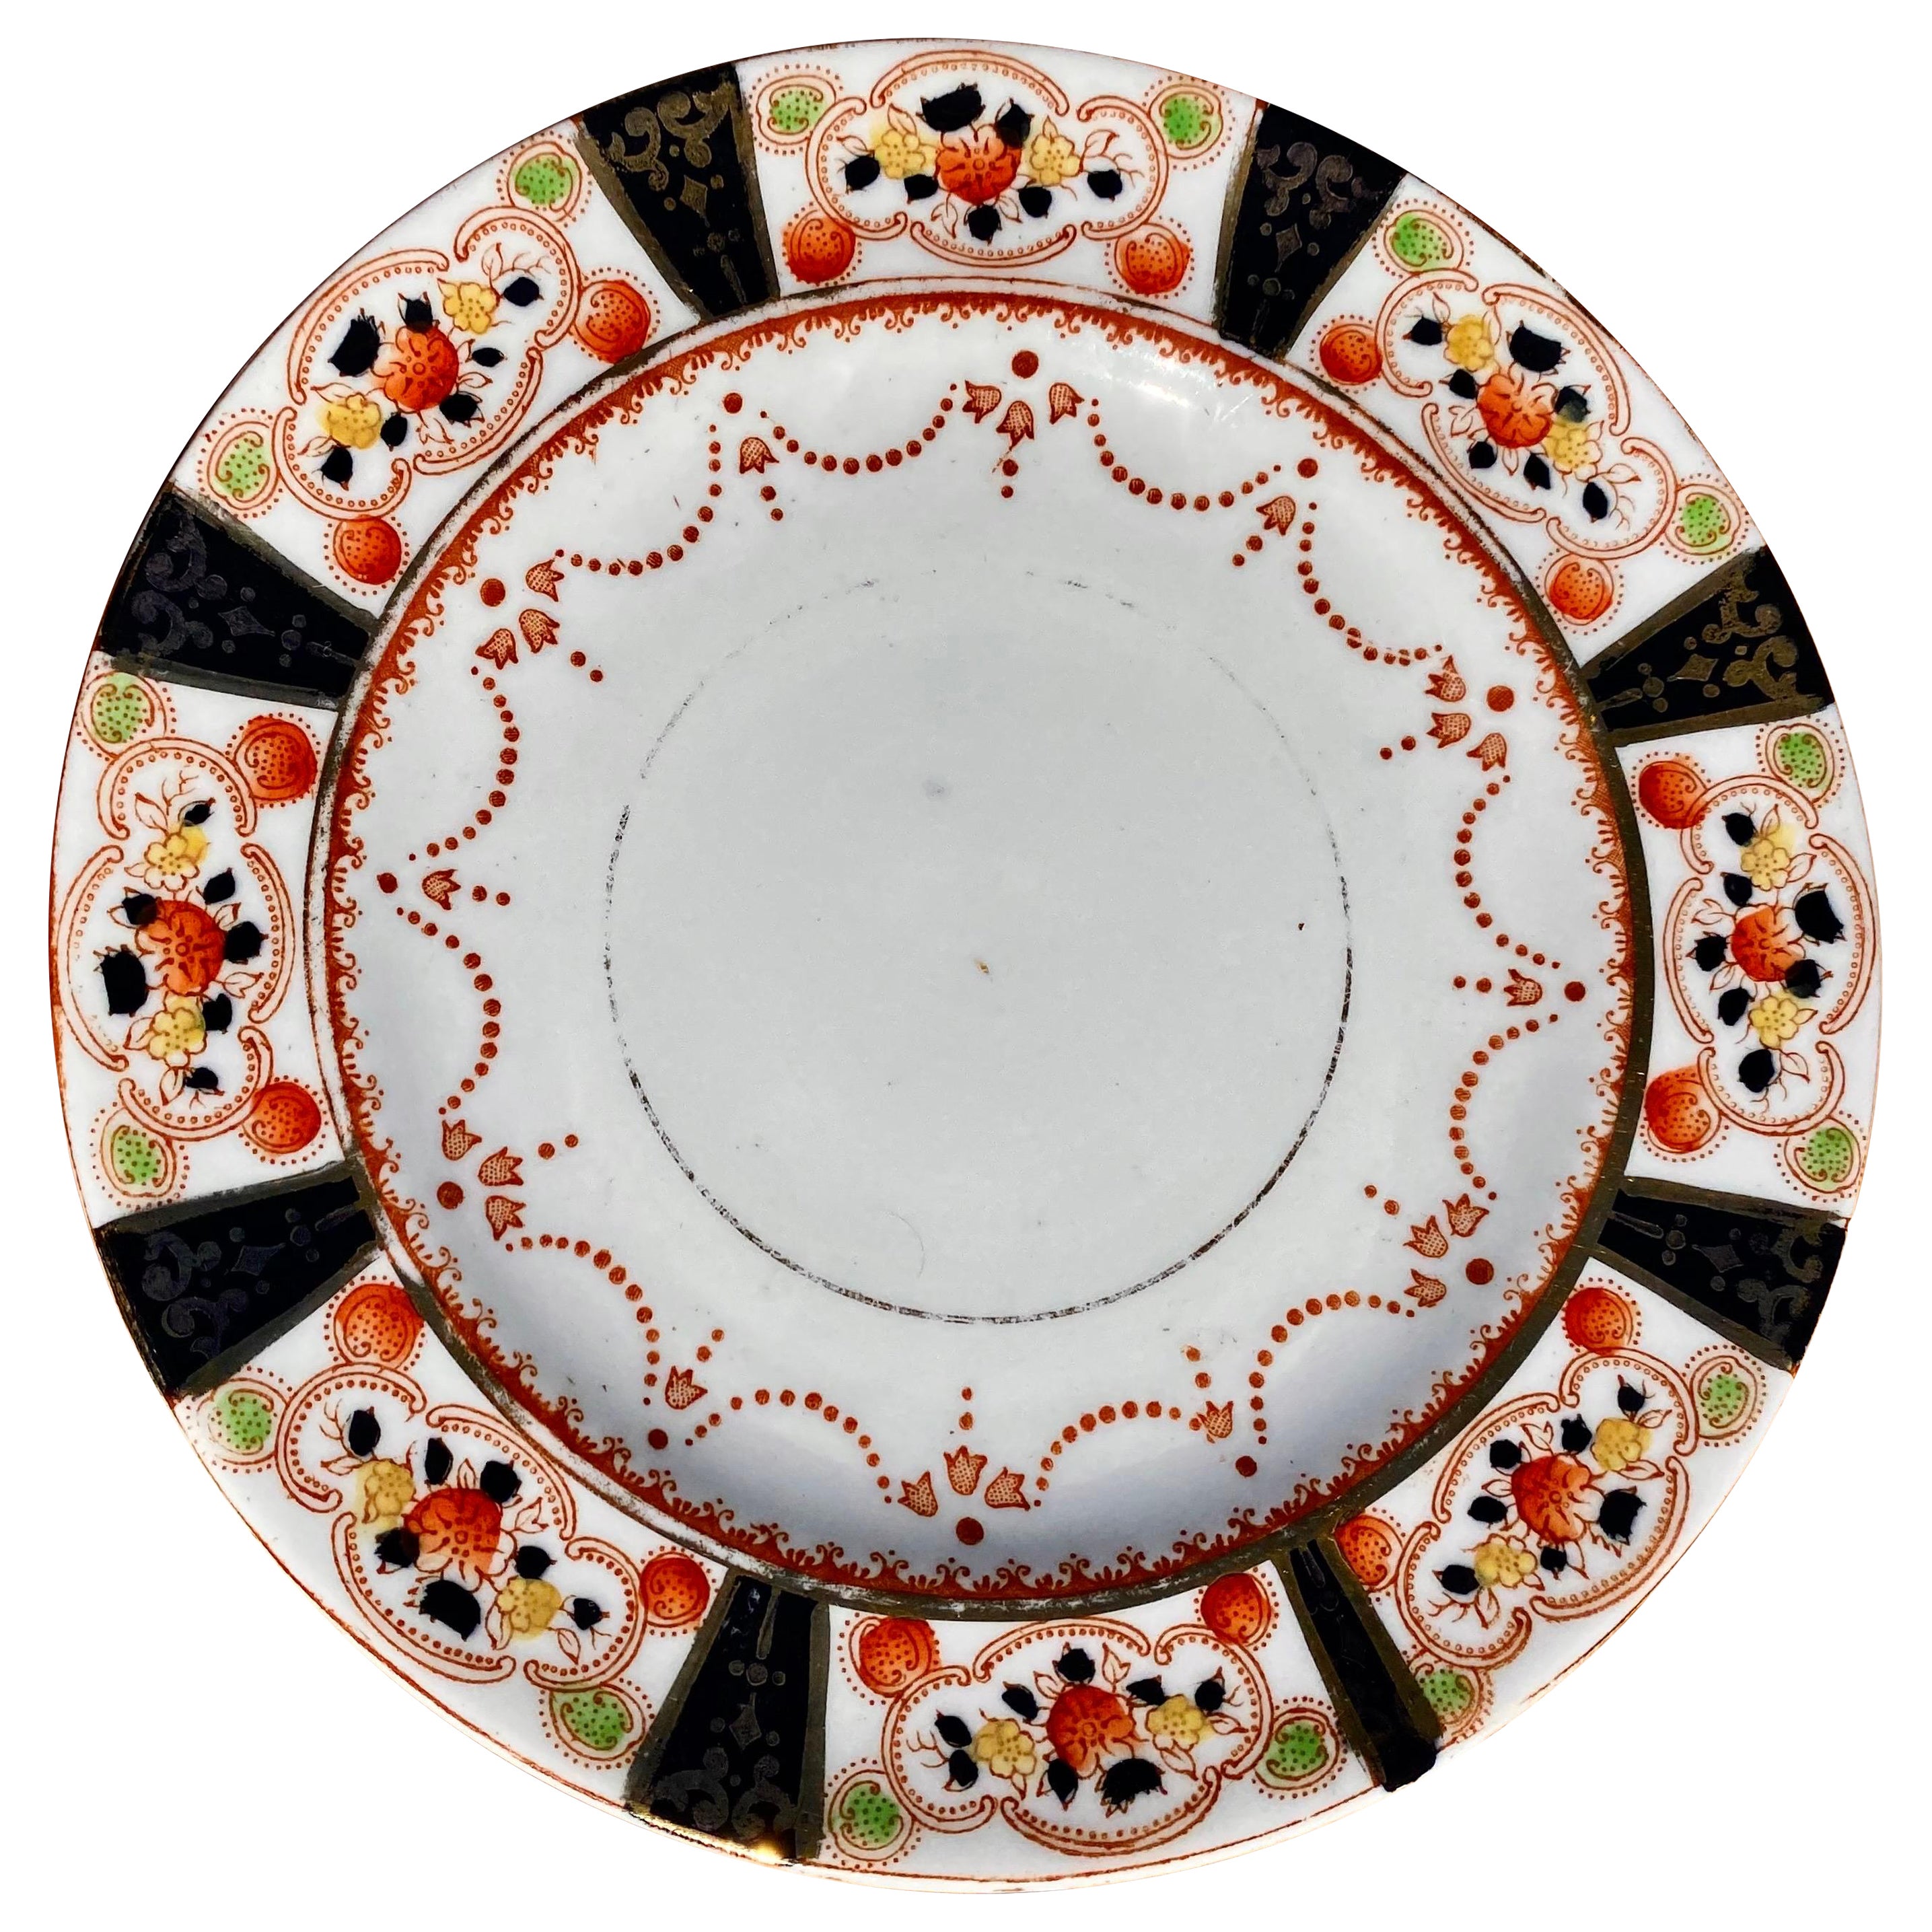 Antique Mayer & Sherratt (Trade Name Melba
China) set of six cake/salad plates in the Imari pattern.
Mayer & Sherratt manufactured china at the Clifton works in Stafford street, Longton, Stoke-on-Trent, they were in operation between 1906 - 1941,